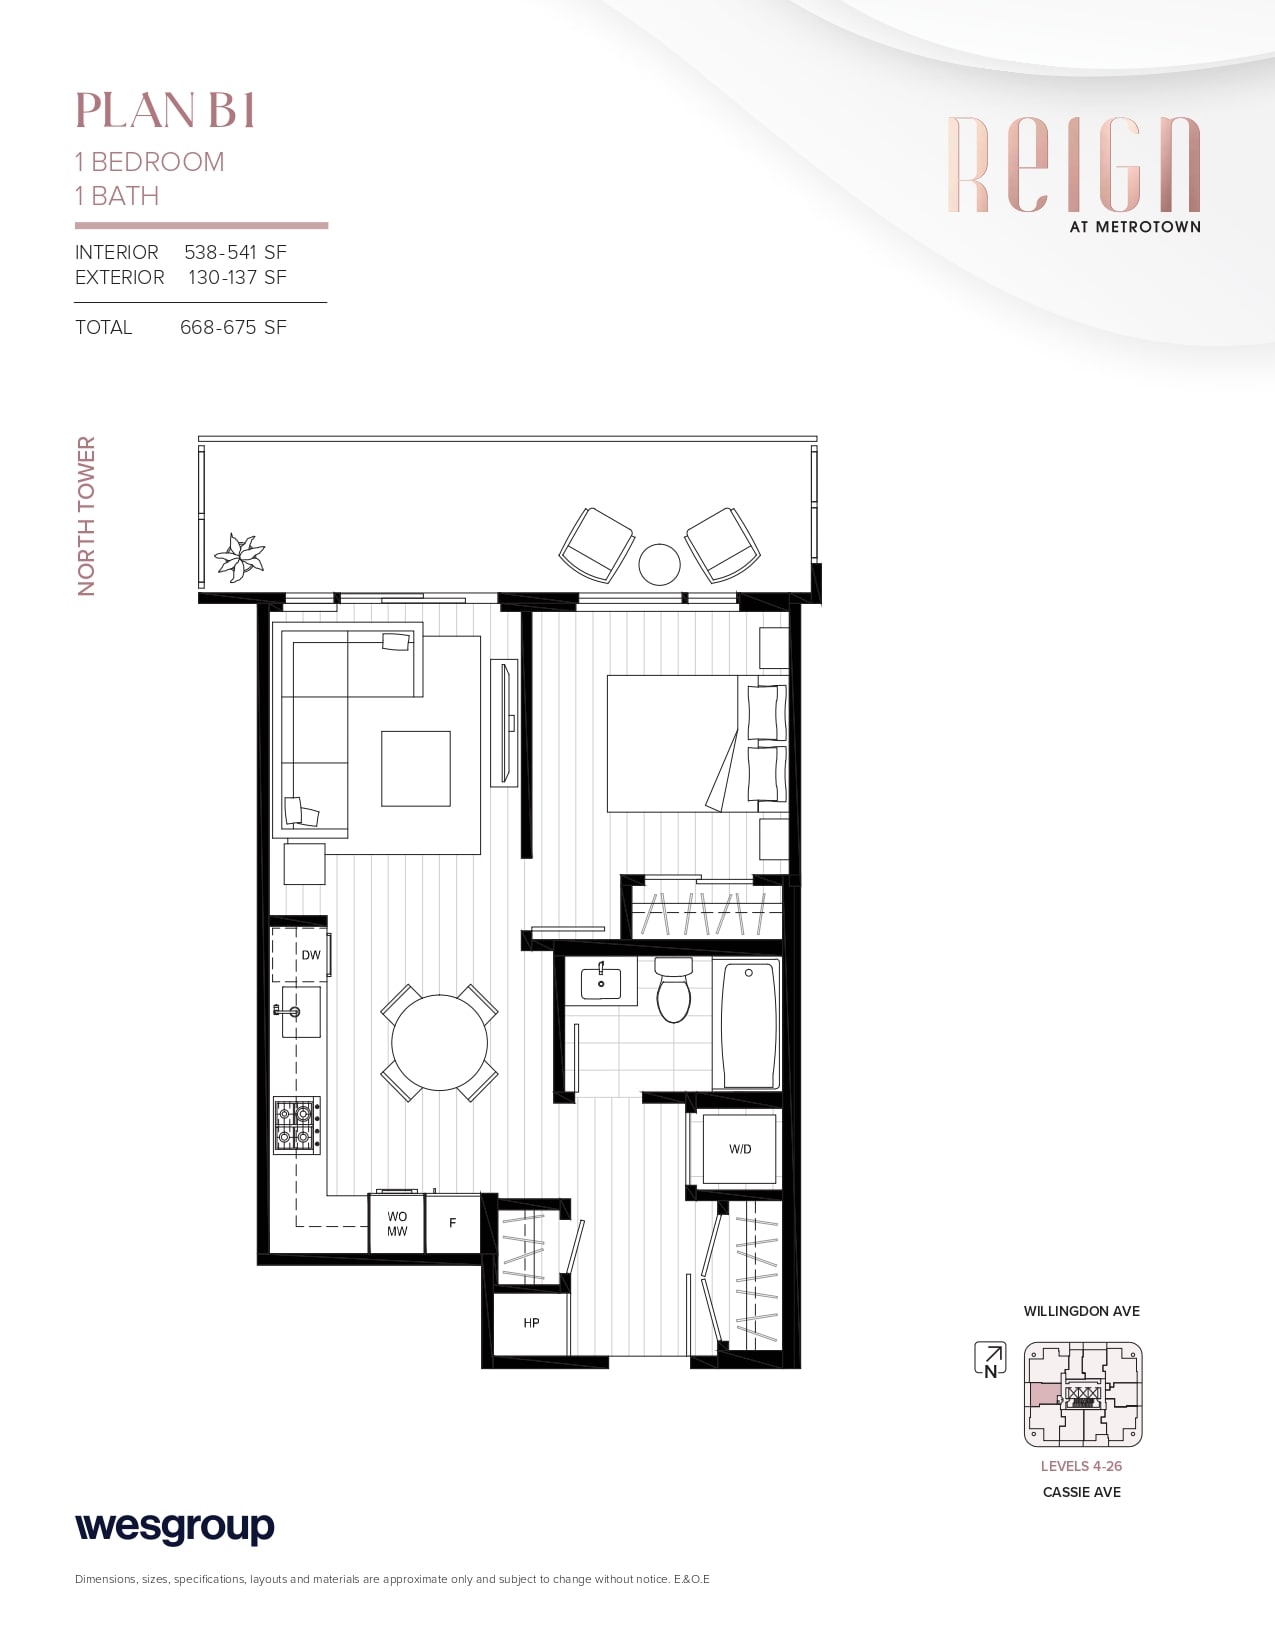 Reign_-_North_Tower_-_Typical_Floorplans_-_FINAL__page-0003-min.jpg